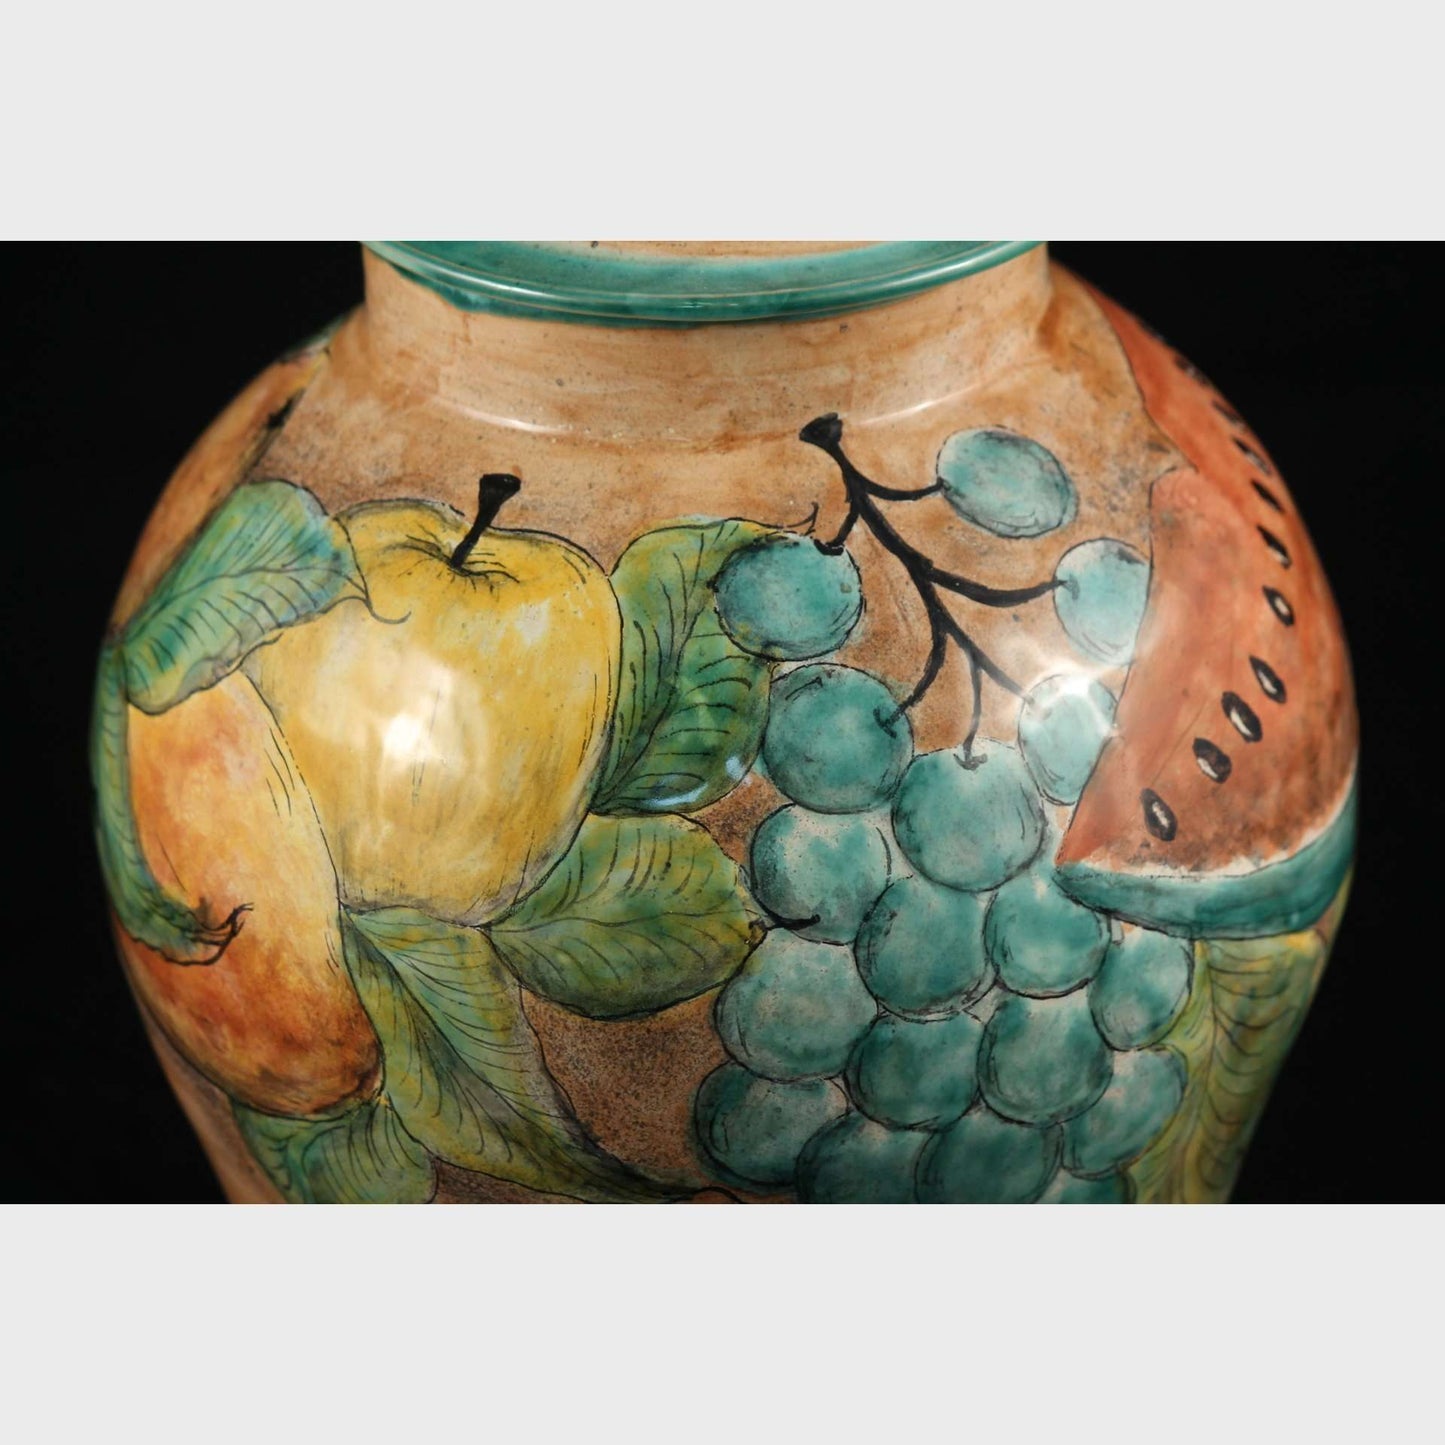 Mexican Ceramic/Pottery Jar/Container w Lid, Talavera, Hand Painted Fruit